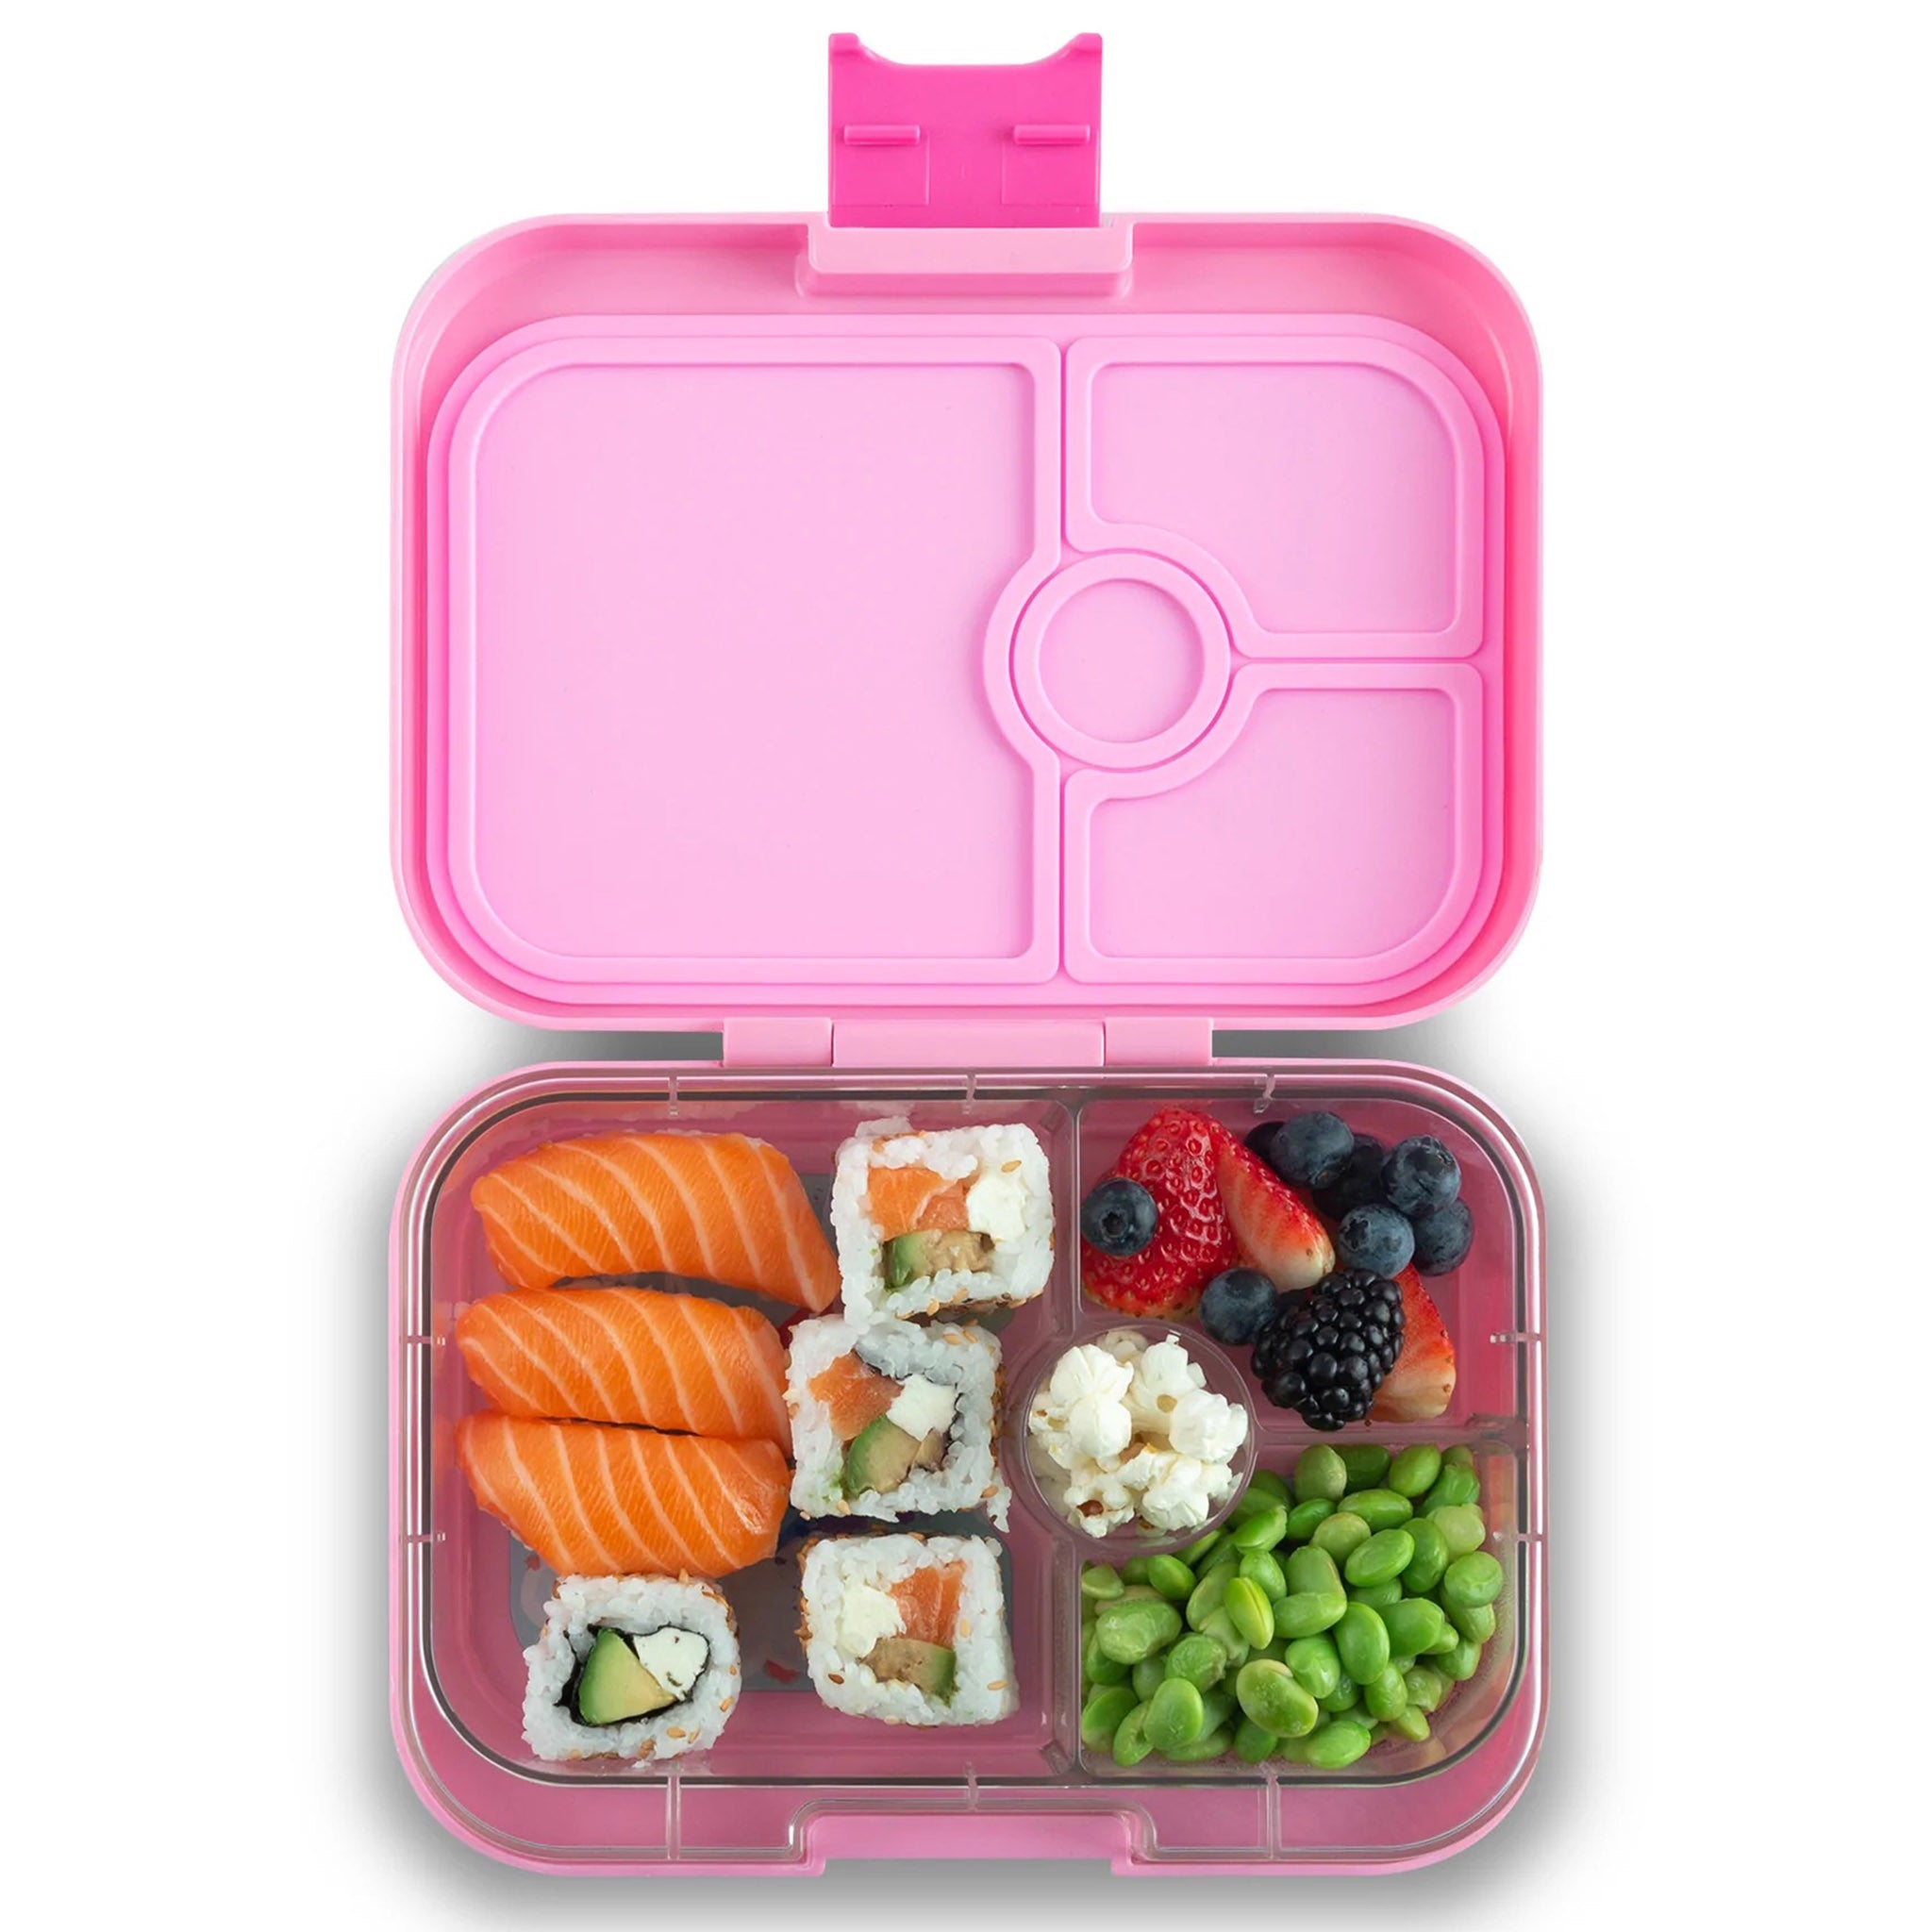 Simple Wrap Lunch and Yumbox Panino Review - Eats Amazing.